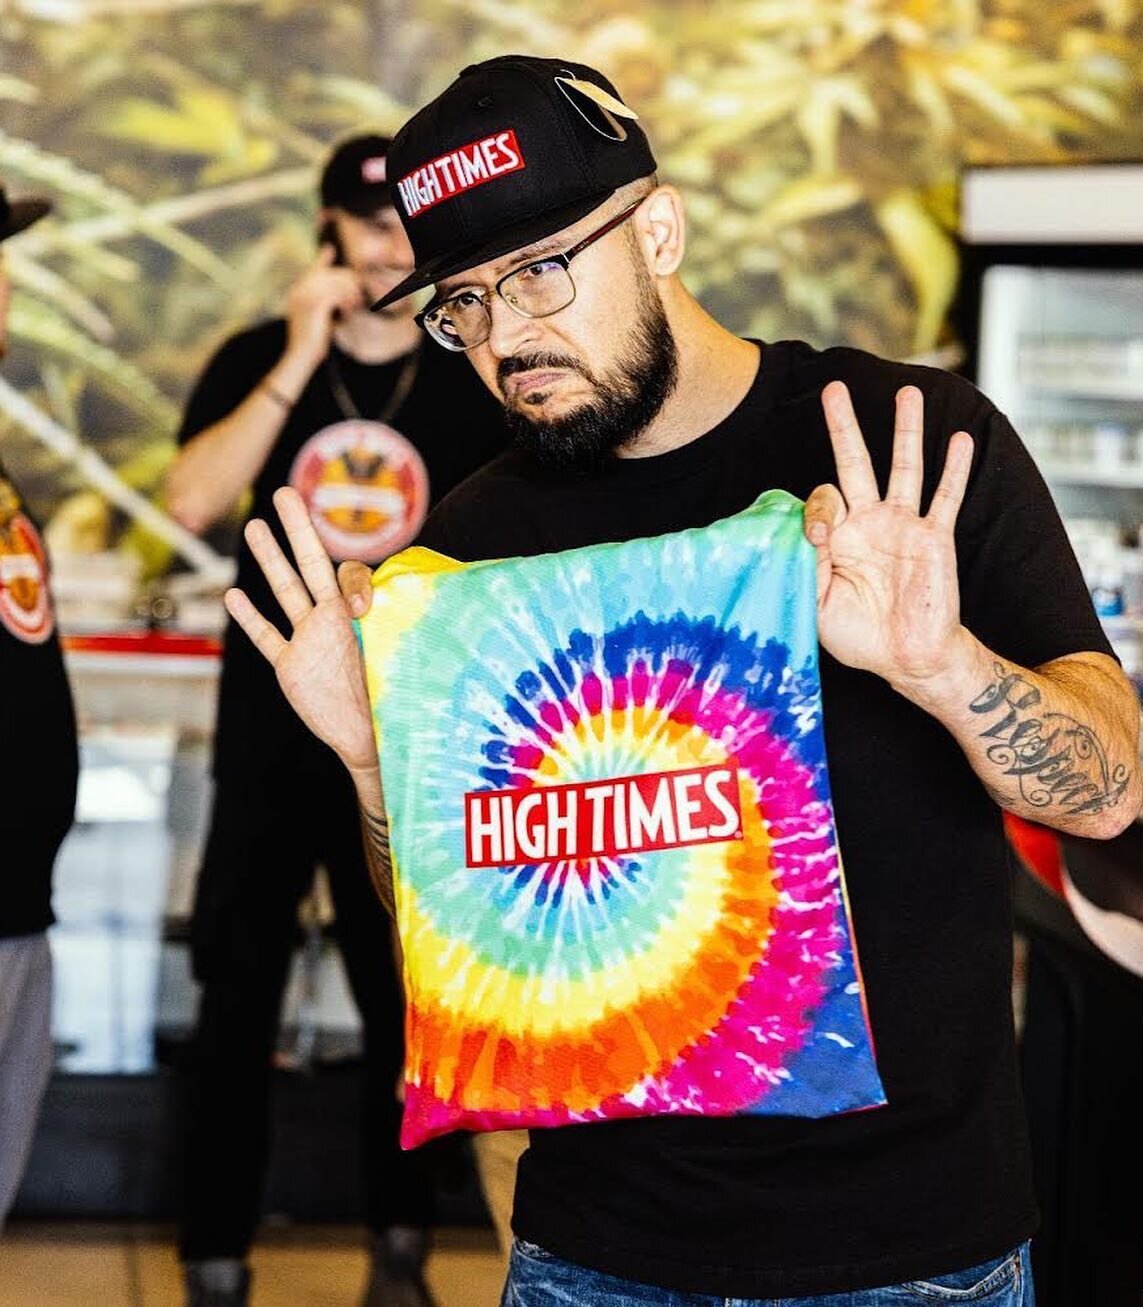 Yo! New Mexico @hightimesmagazine cup just announced 🚨 featuring @methodmanofficial &amp; @redmangilla @devindude420 
Oh and we still have a few of these HT snapbacks for sale on the site 💸 get one today before they sell out 🤙🏼